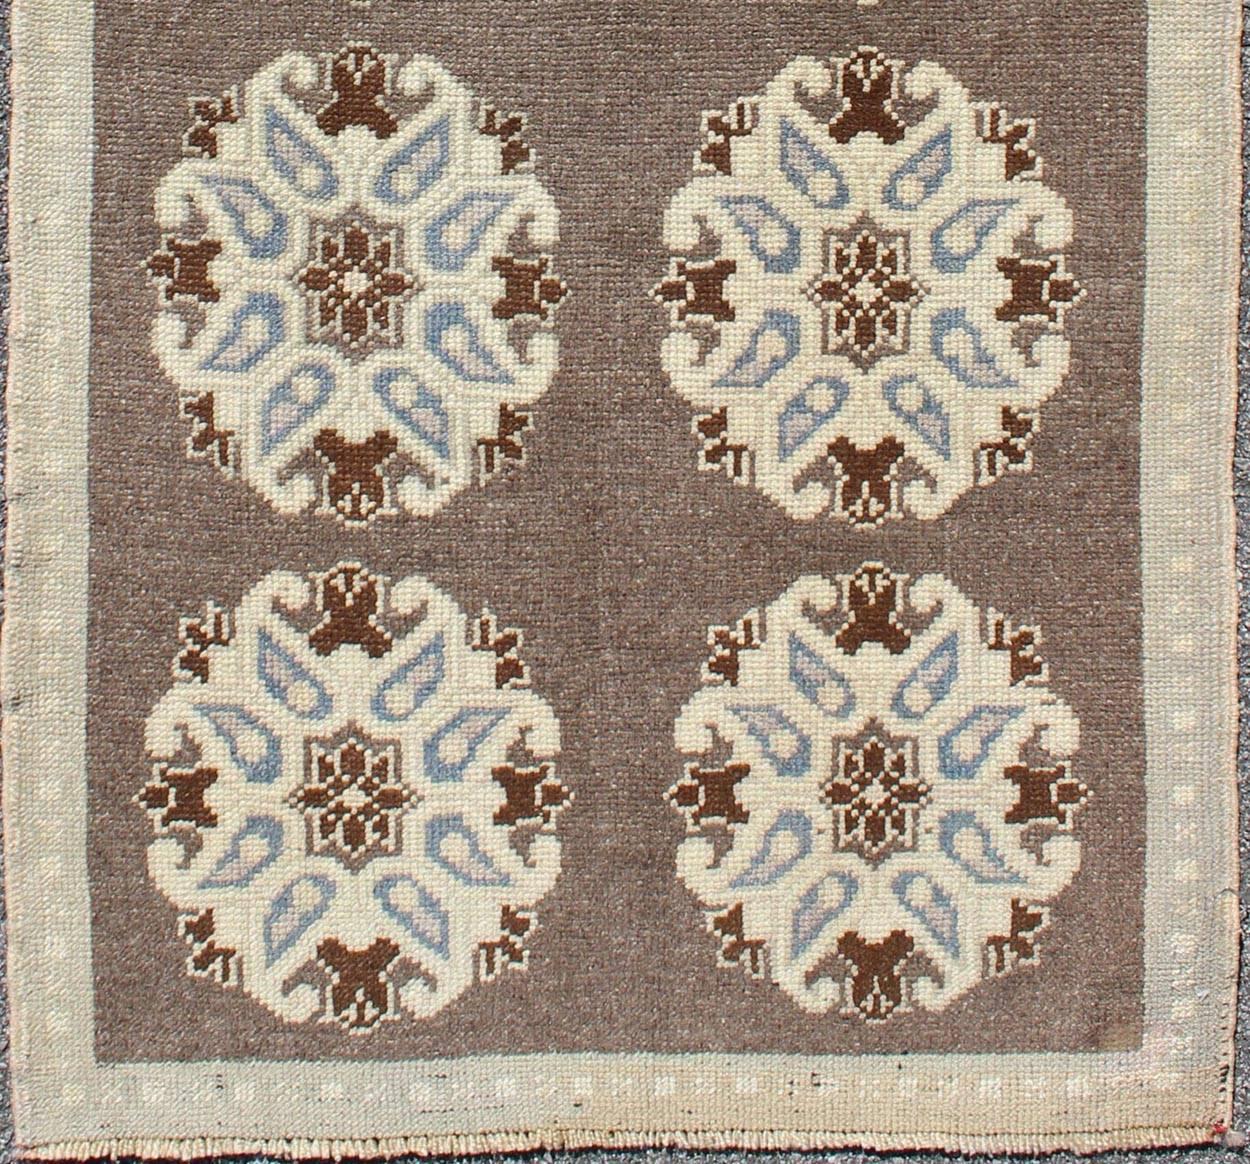 This Turkish Oushak gallery rug features ten floral medallions that take center stage on a brown field. The border reveals tribal inspiration in soft shades of taupe, cream, blue, and chocolate brown accents. 

Measures: 2'9'' x 6'4''.

Tribal